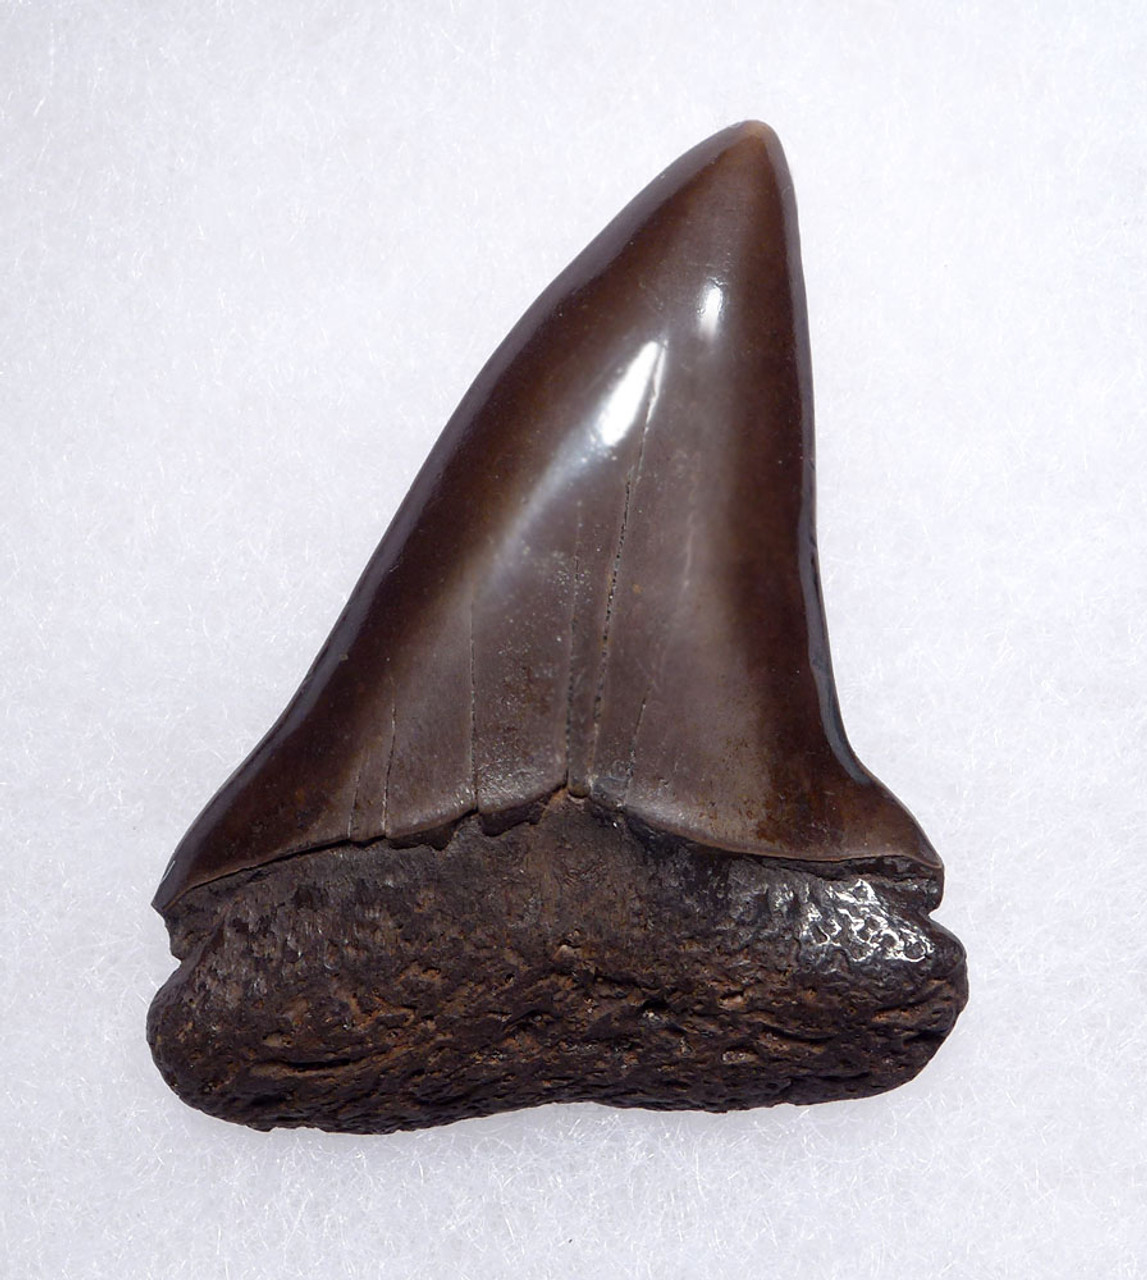 EXCELLENT 1.85 INCH USA FOSSIL SHARK TOOTH OF ISURUS HASTALIS BROAD TOOTH MAKO WITH CHATOYANT BRONZE ENAMEL  *SHX157